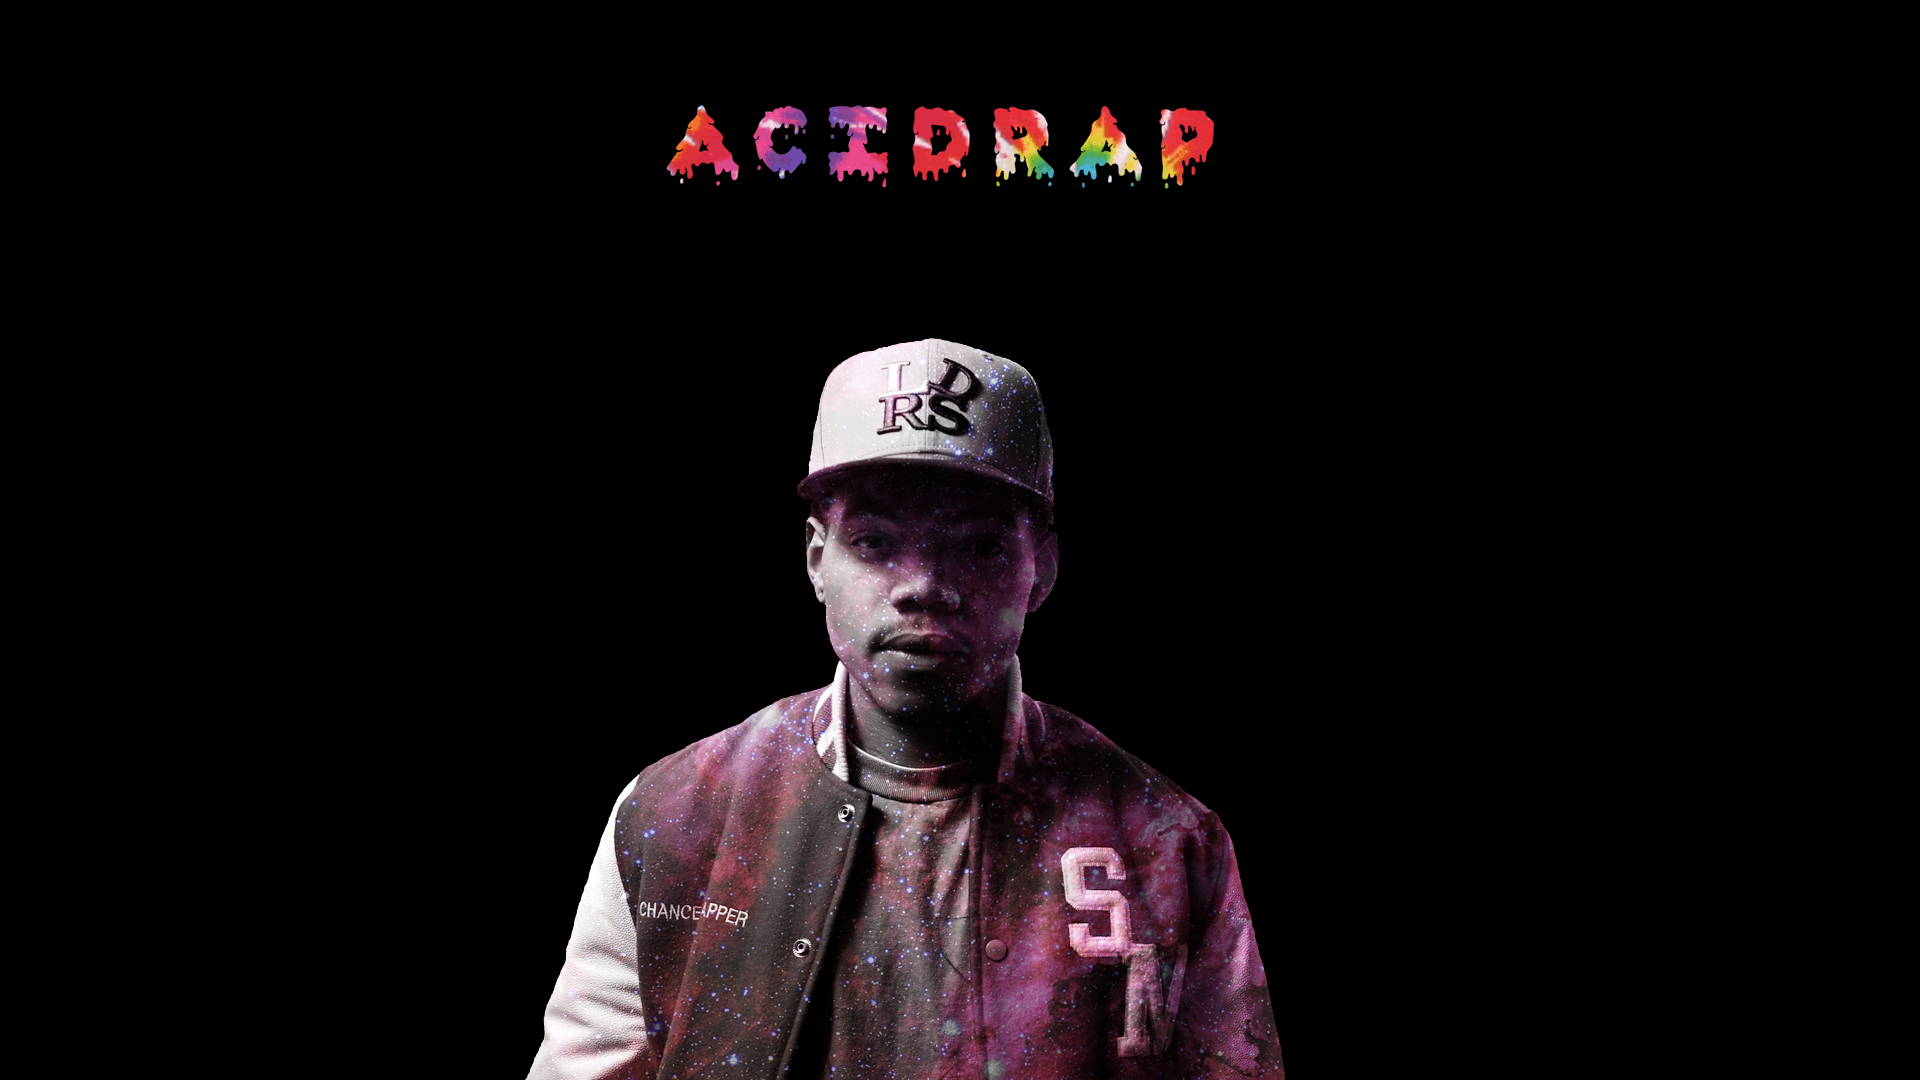 Chance The Rapper phone, desktop wallpaper, picture, photo, bckground image